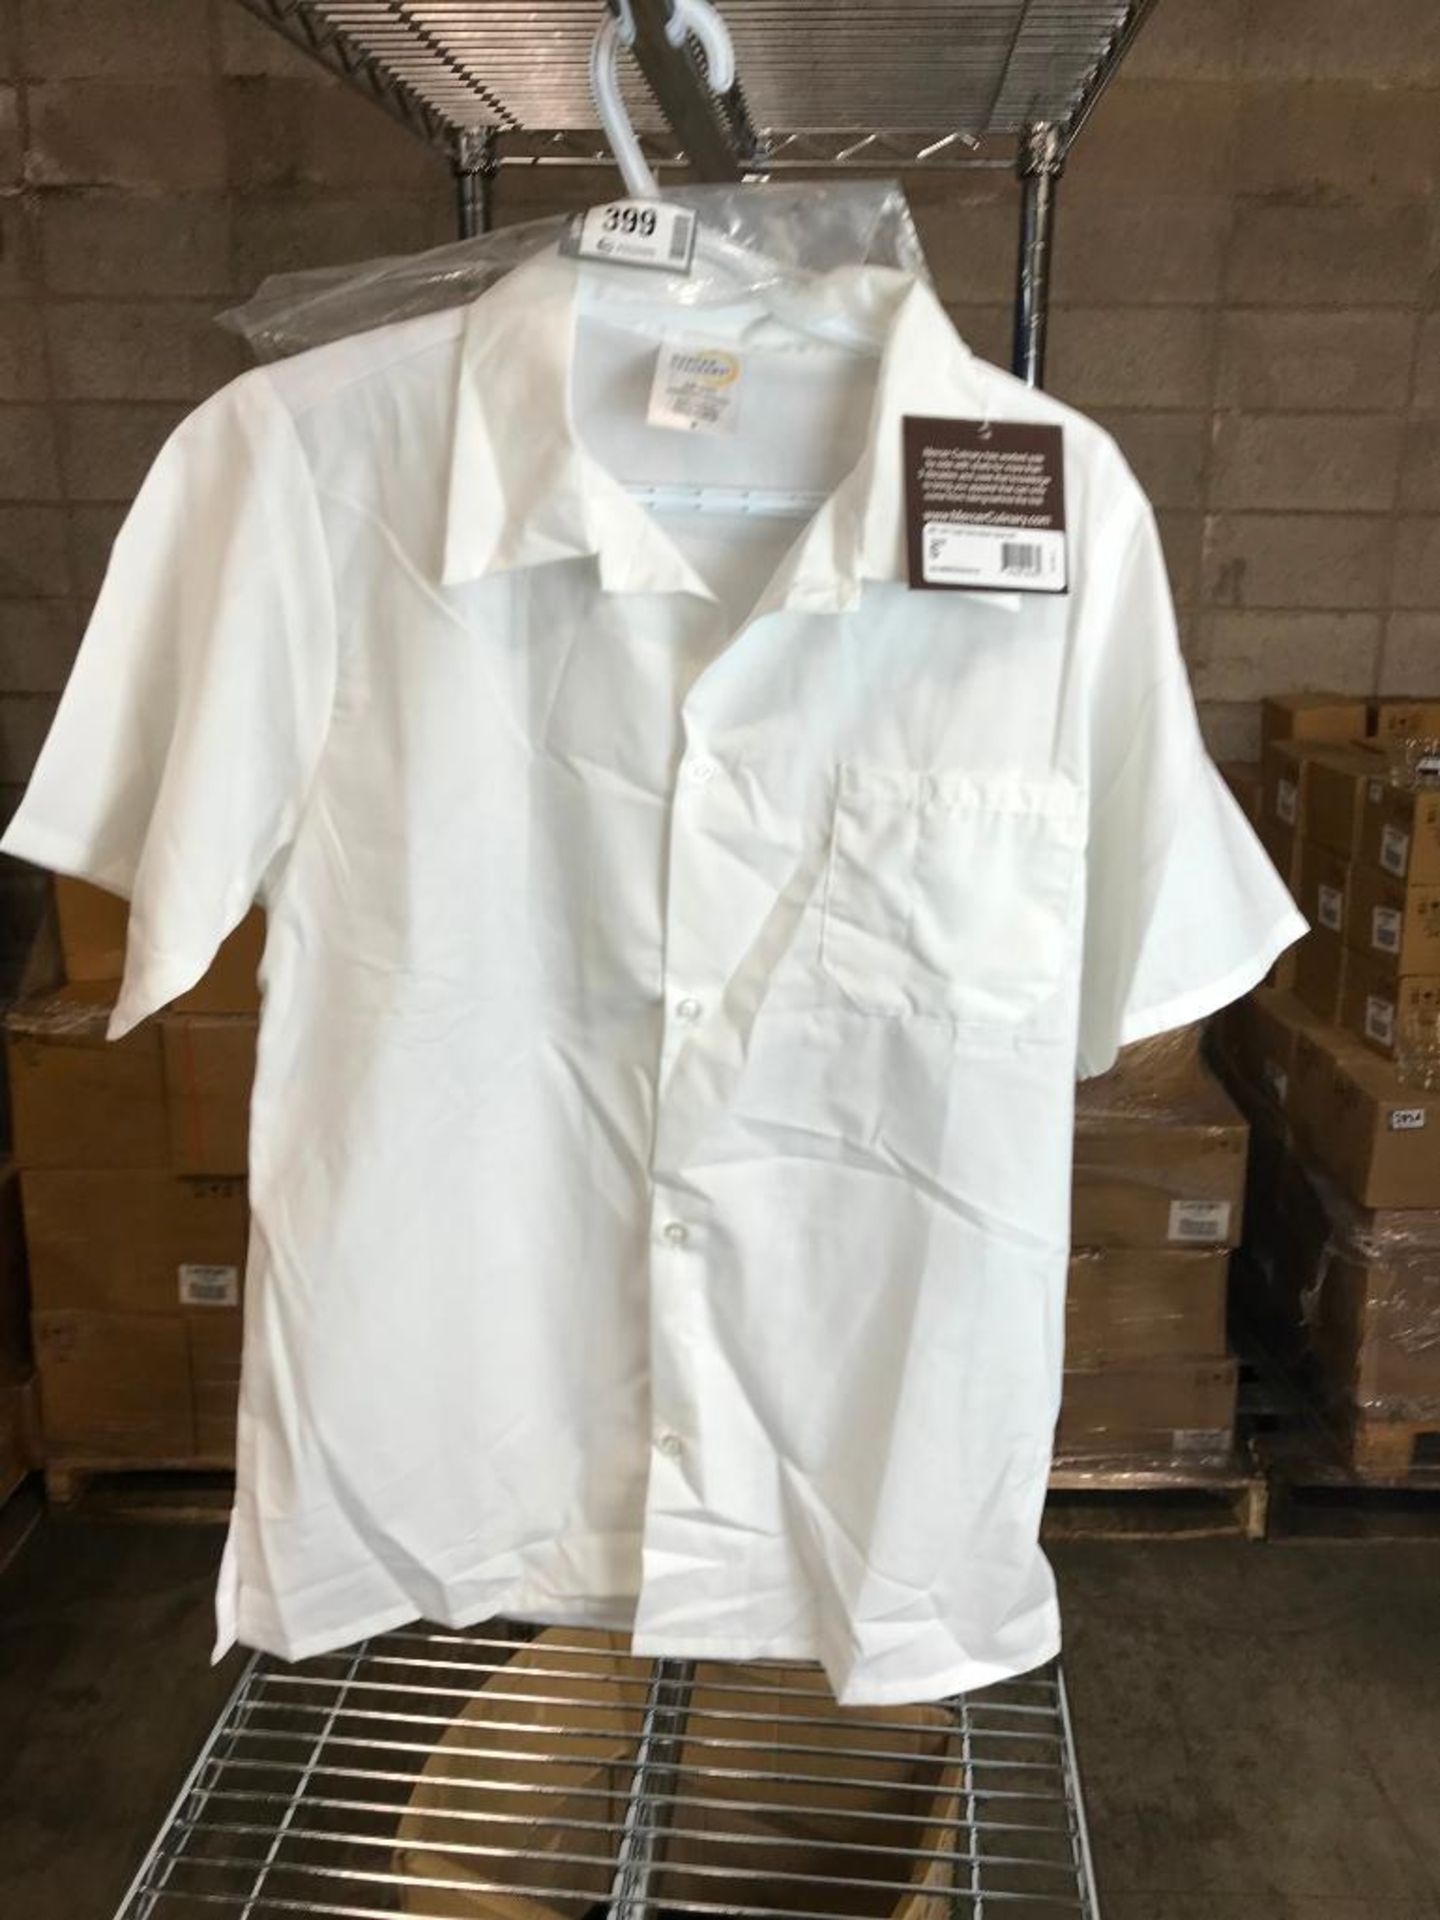 MERCER CULINARY MIL UNI COOK SHIRT-MESH BACK WHITE SIZE SMALL - M60200WHS